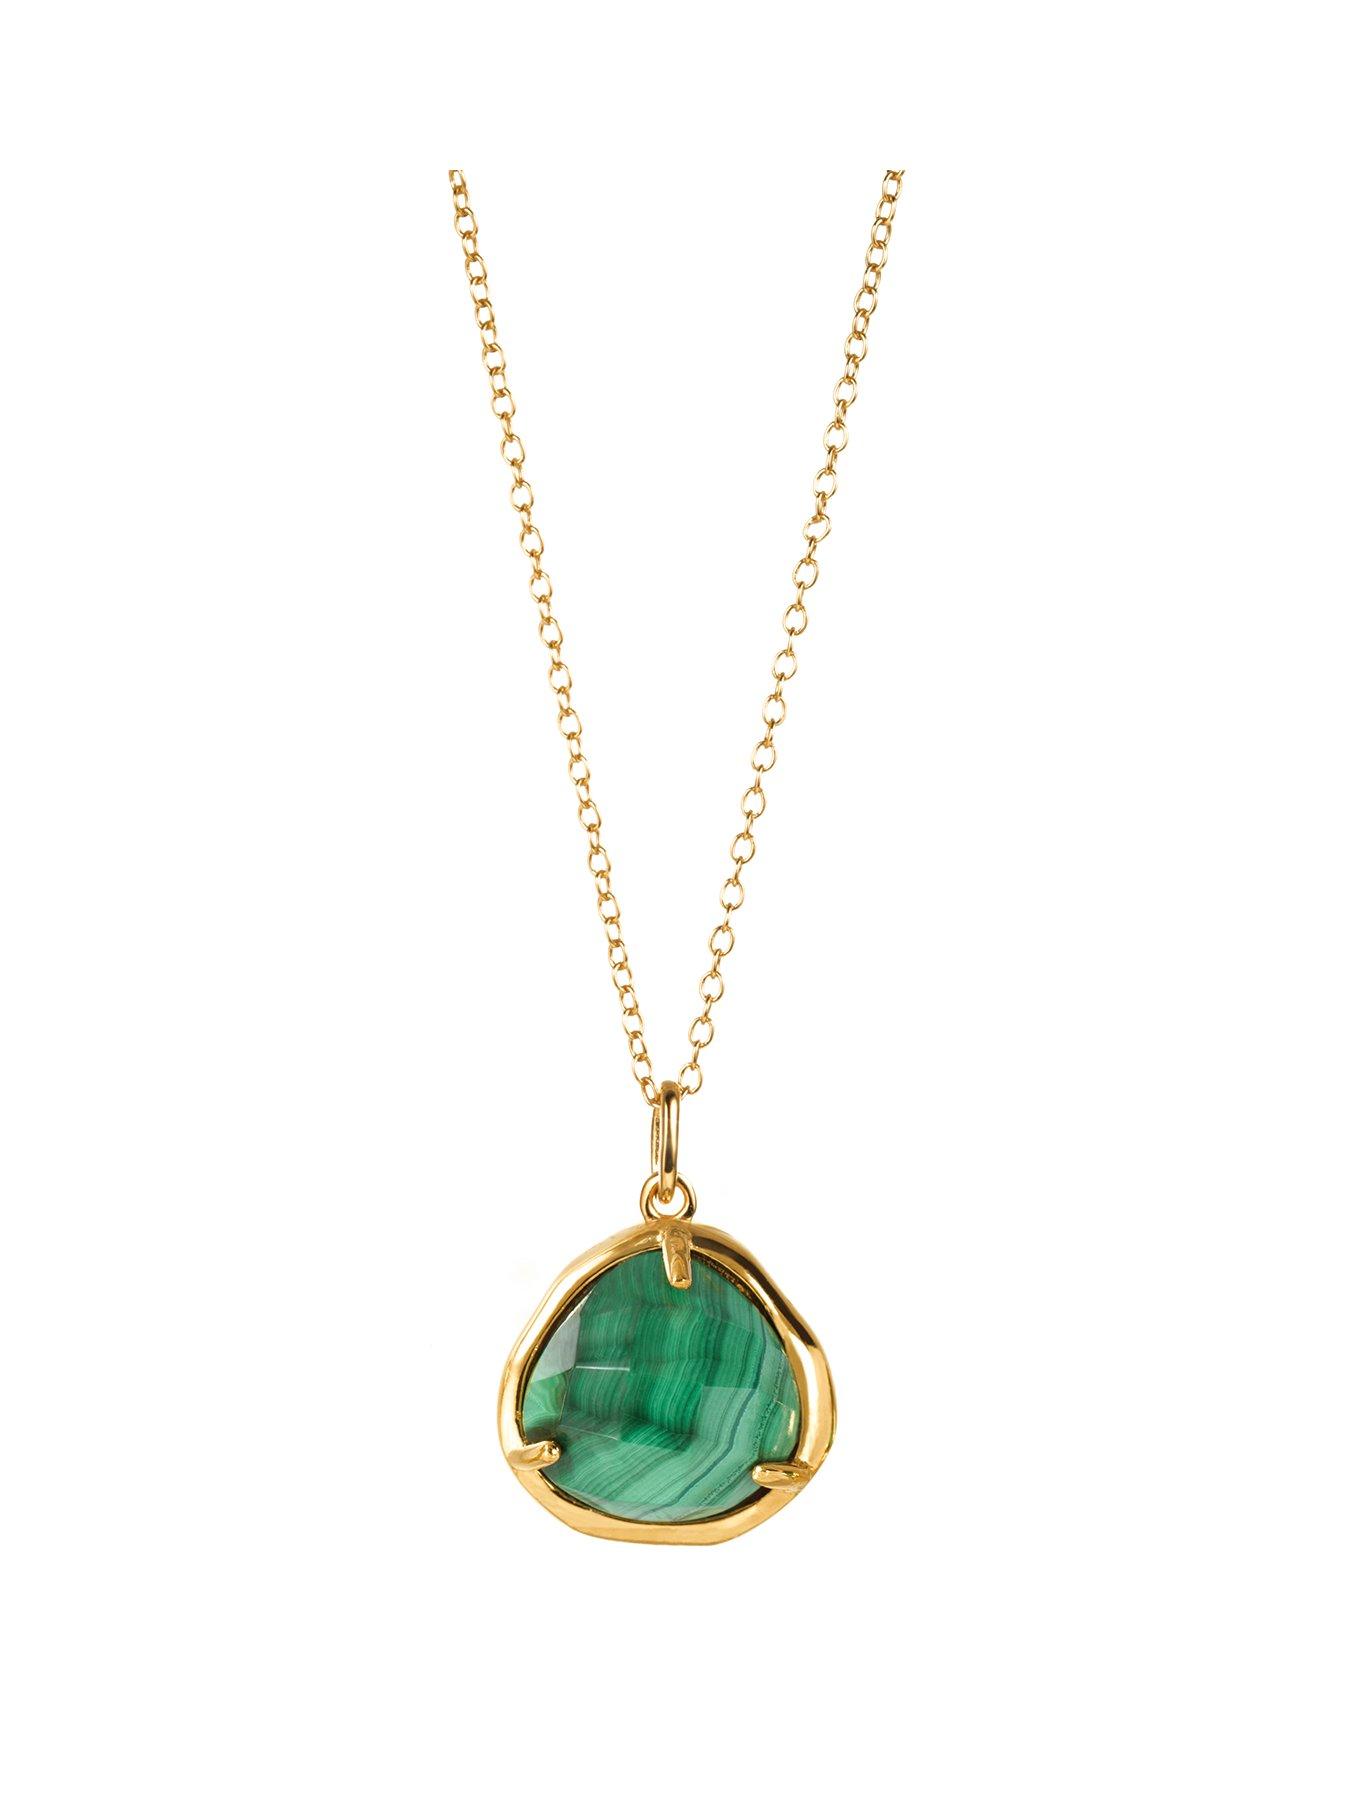 Jewellery & watches Gold Plated Silver Malachite Crystal Pendant 18 Inch Chain